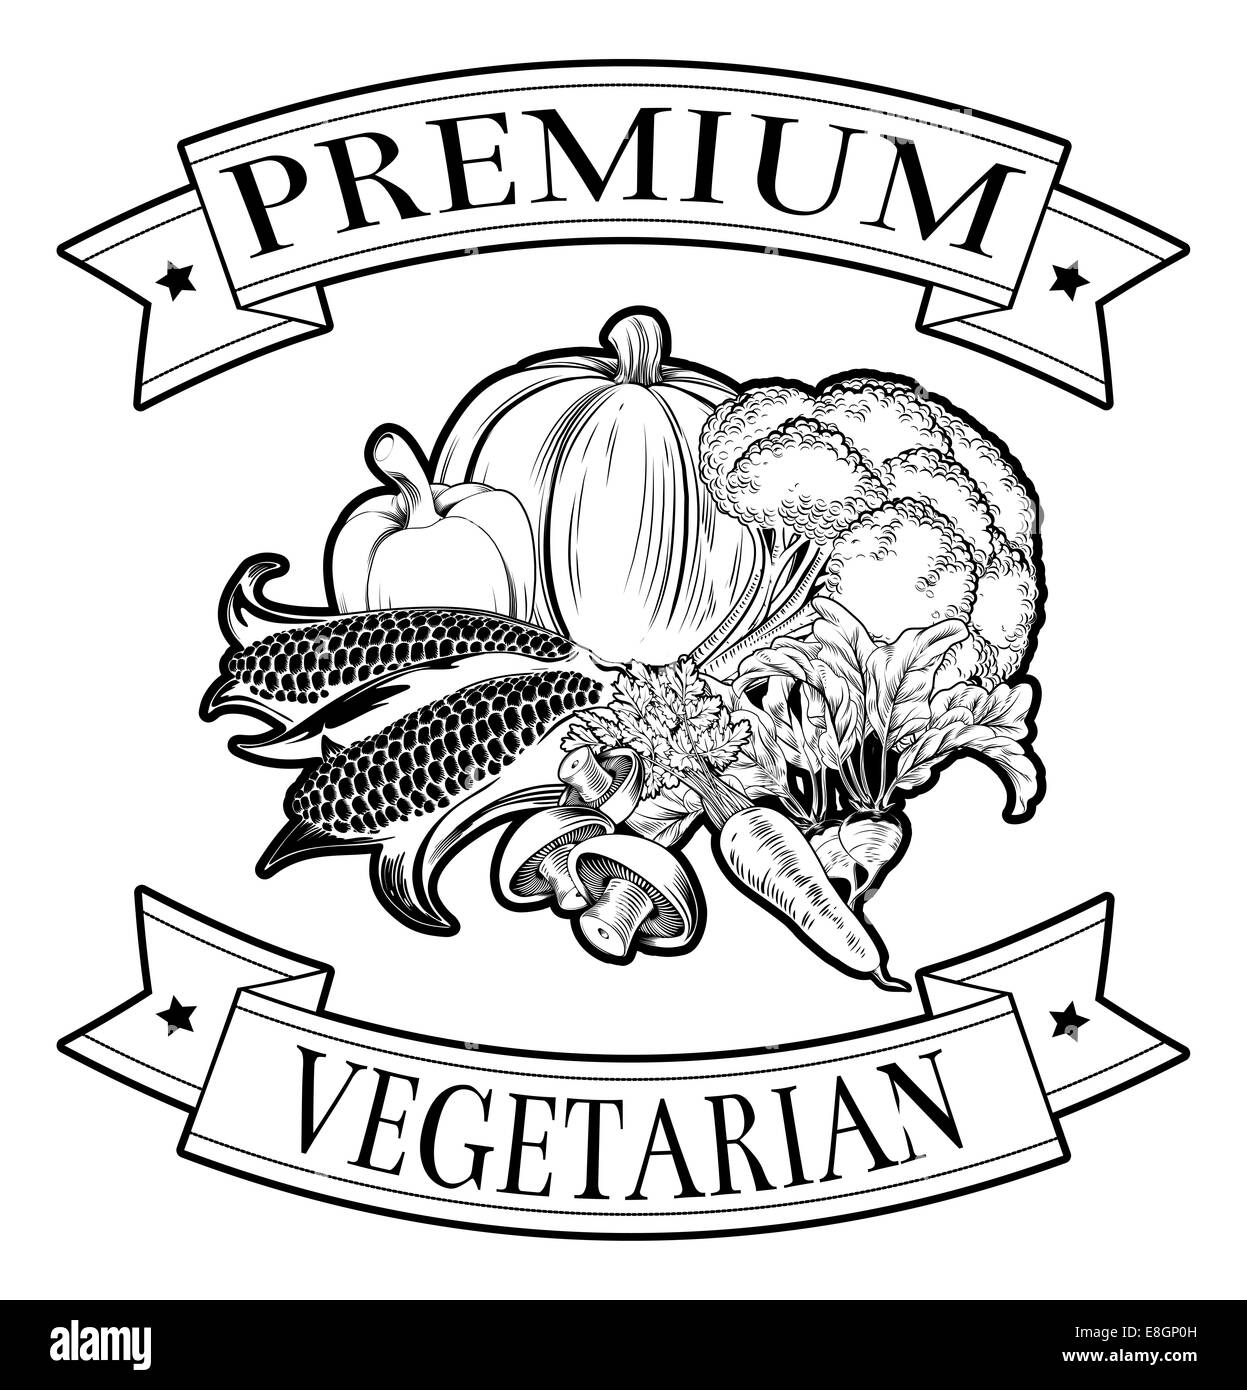 Premium vegetarian menu icon of vegetables and banners in a stamp style Stock Photo